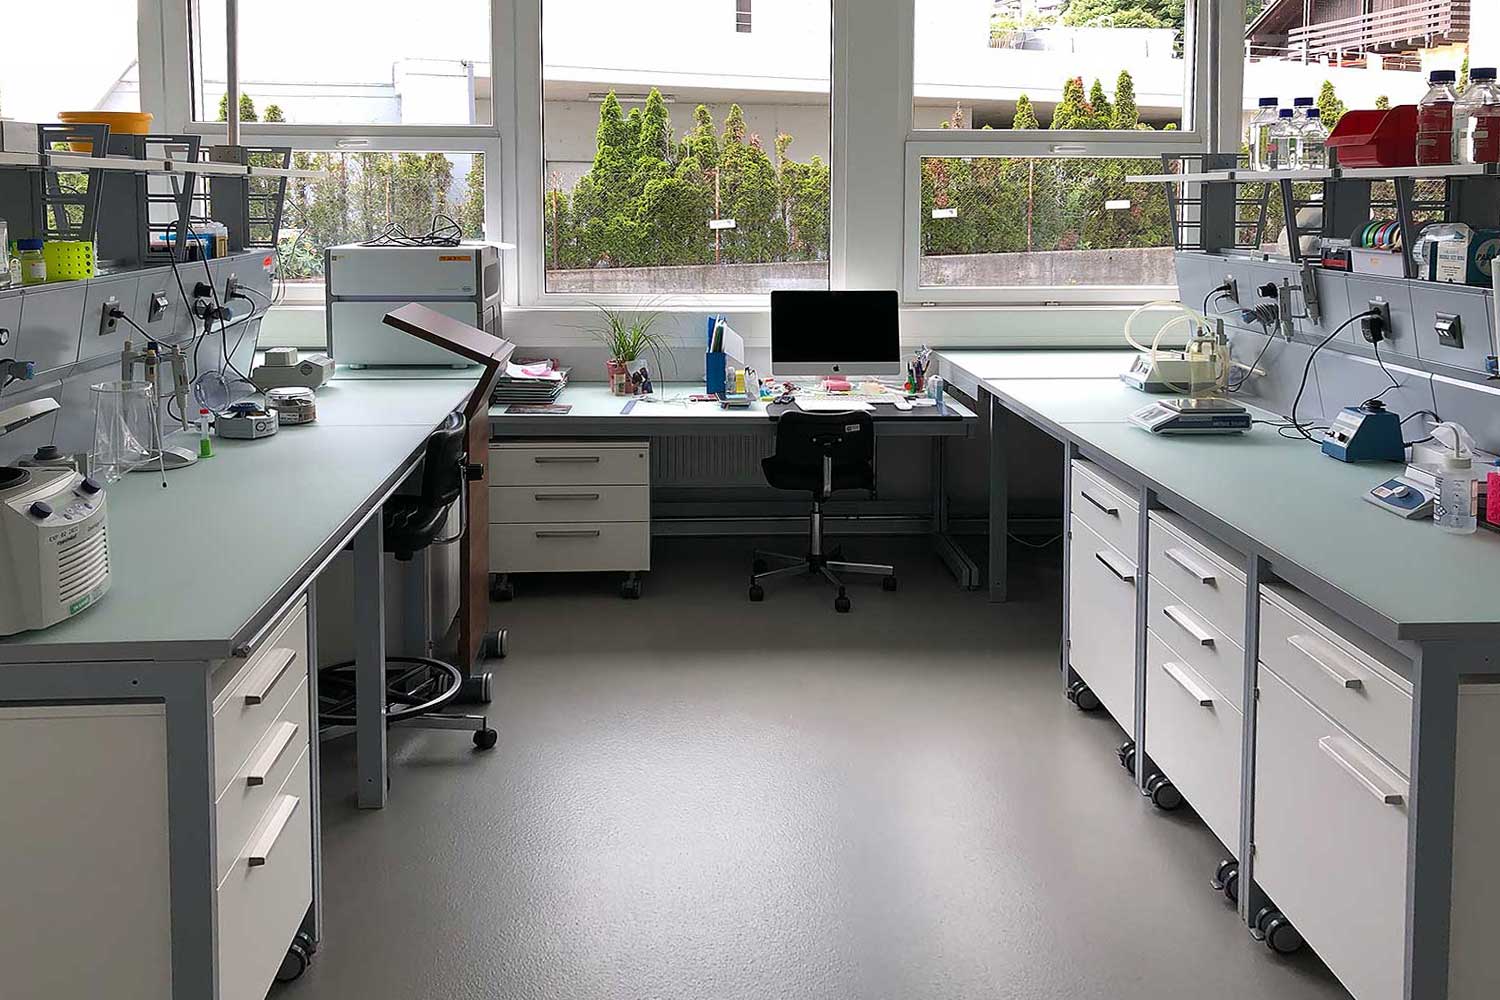 Working space in the BSL-1 lab